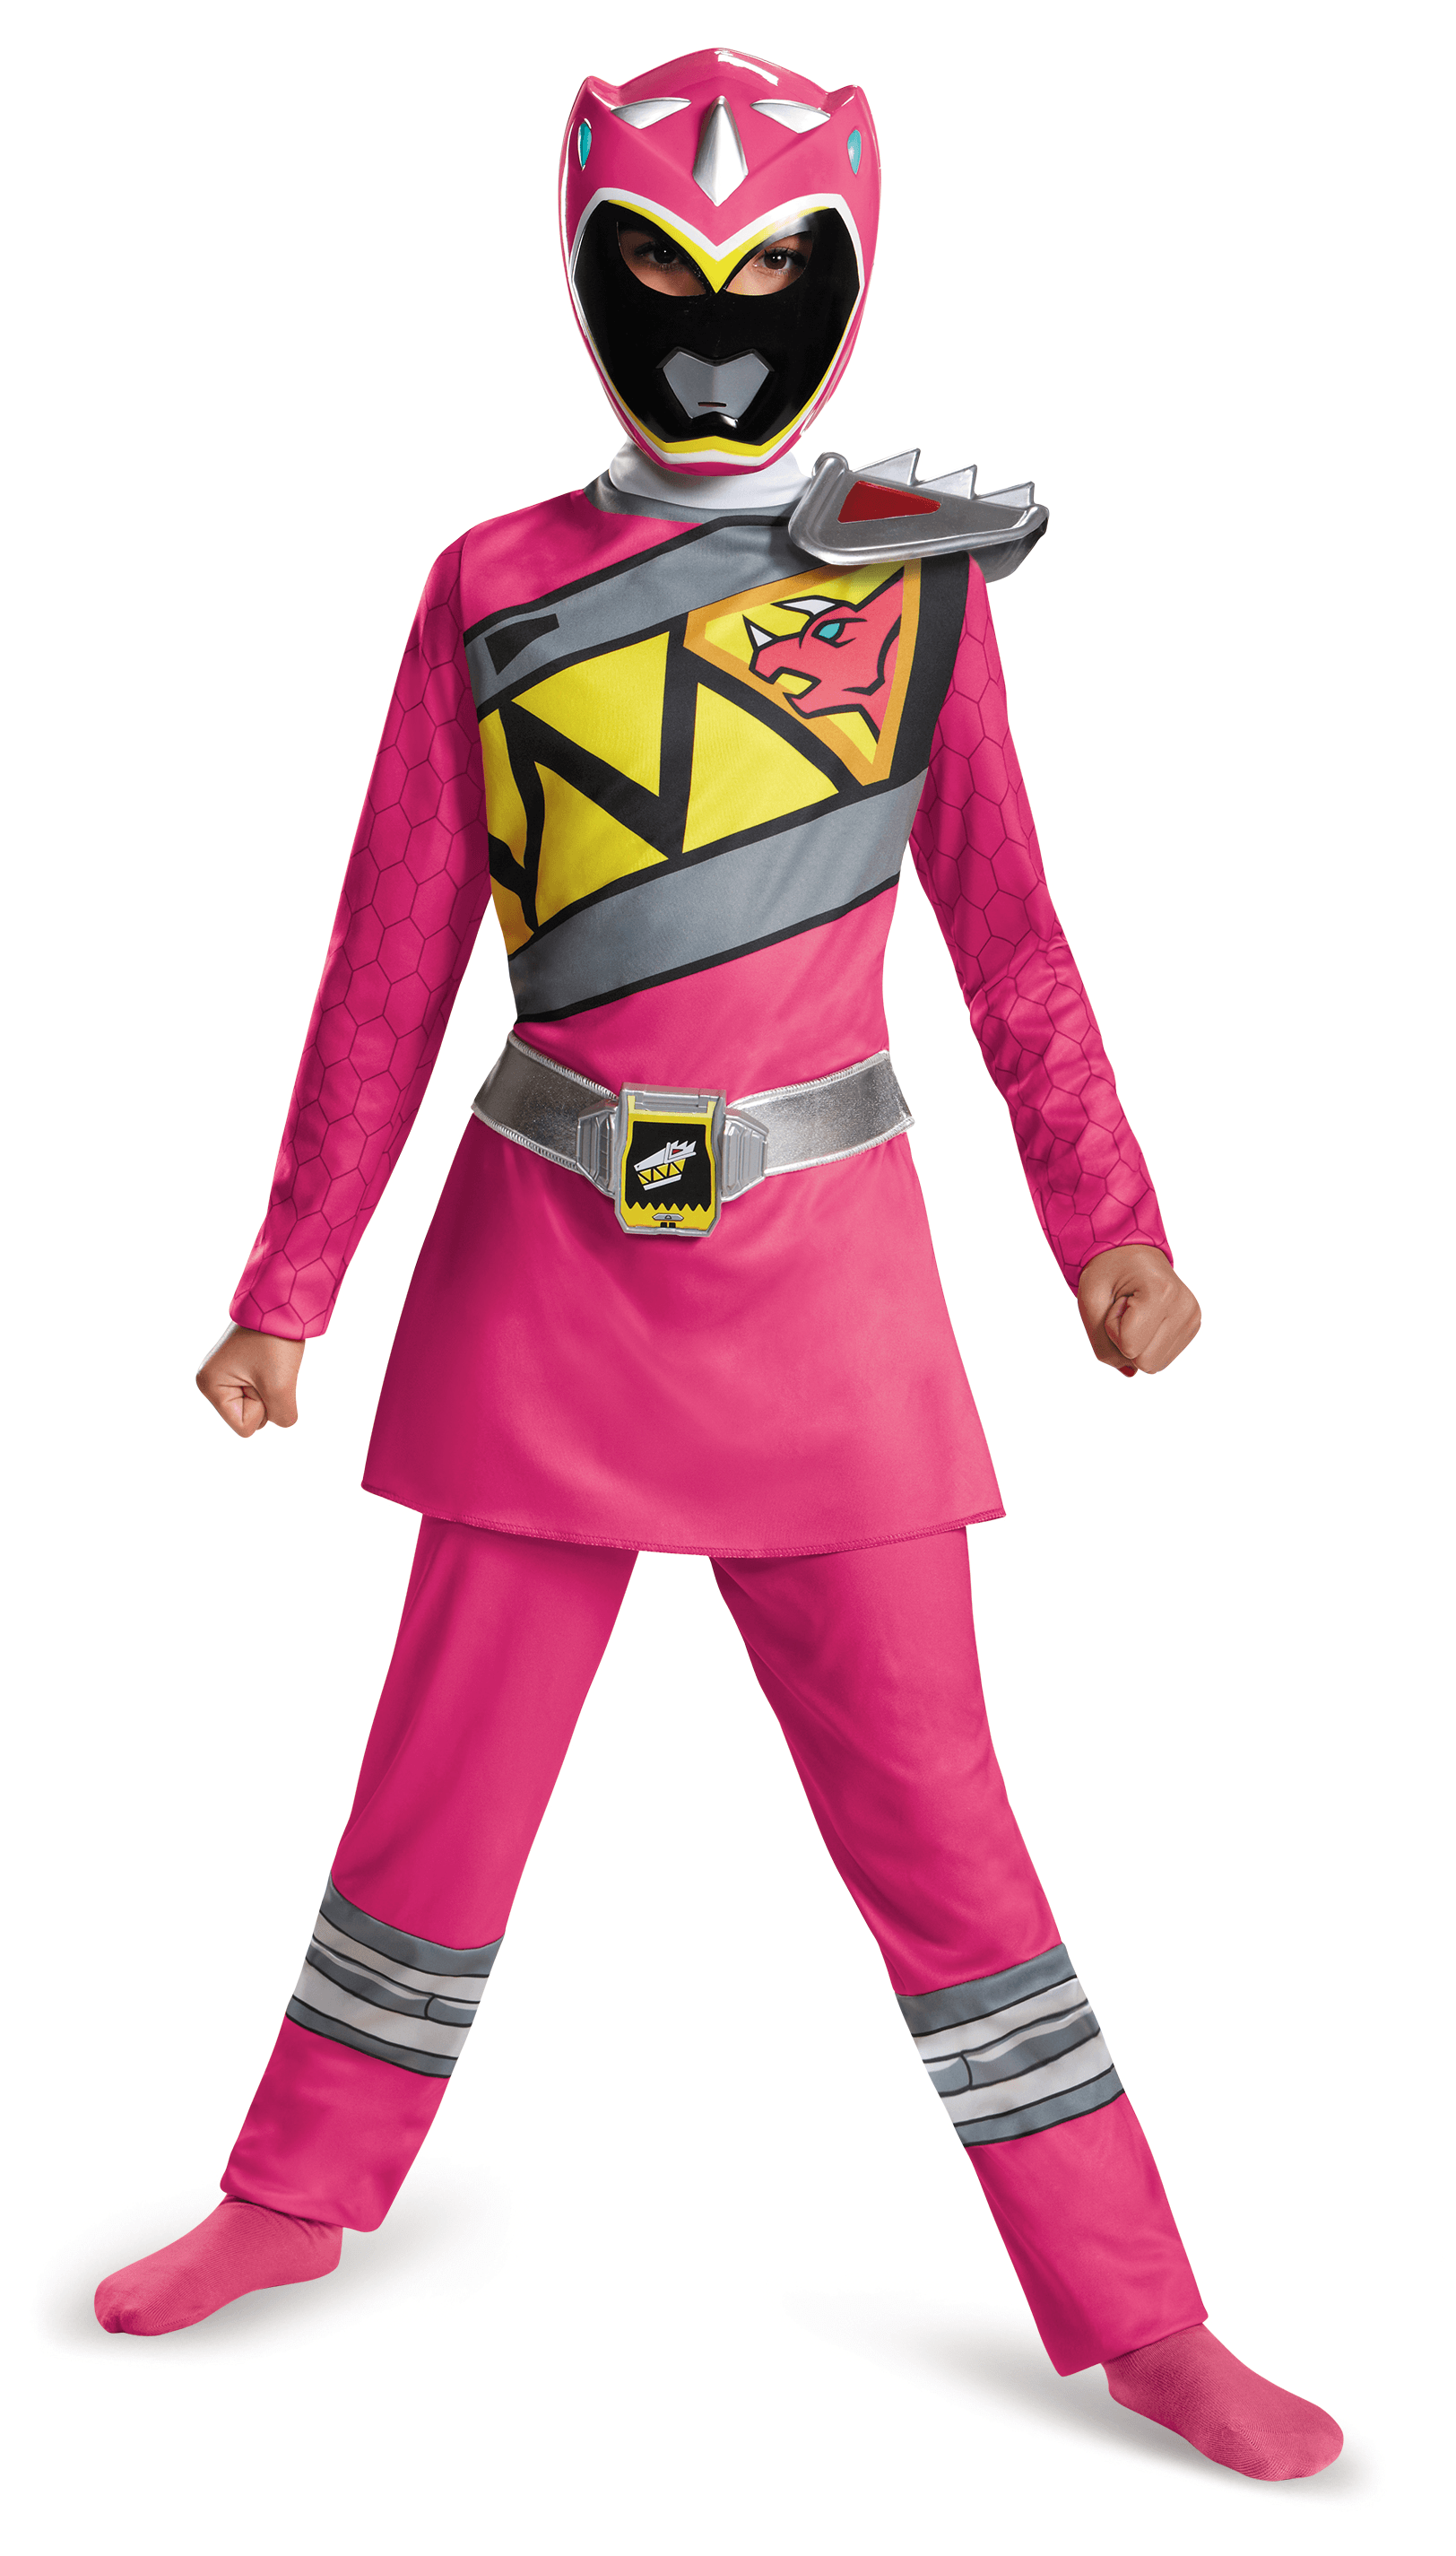 Product Includes: Dino Ranger Pink Classic costume. 